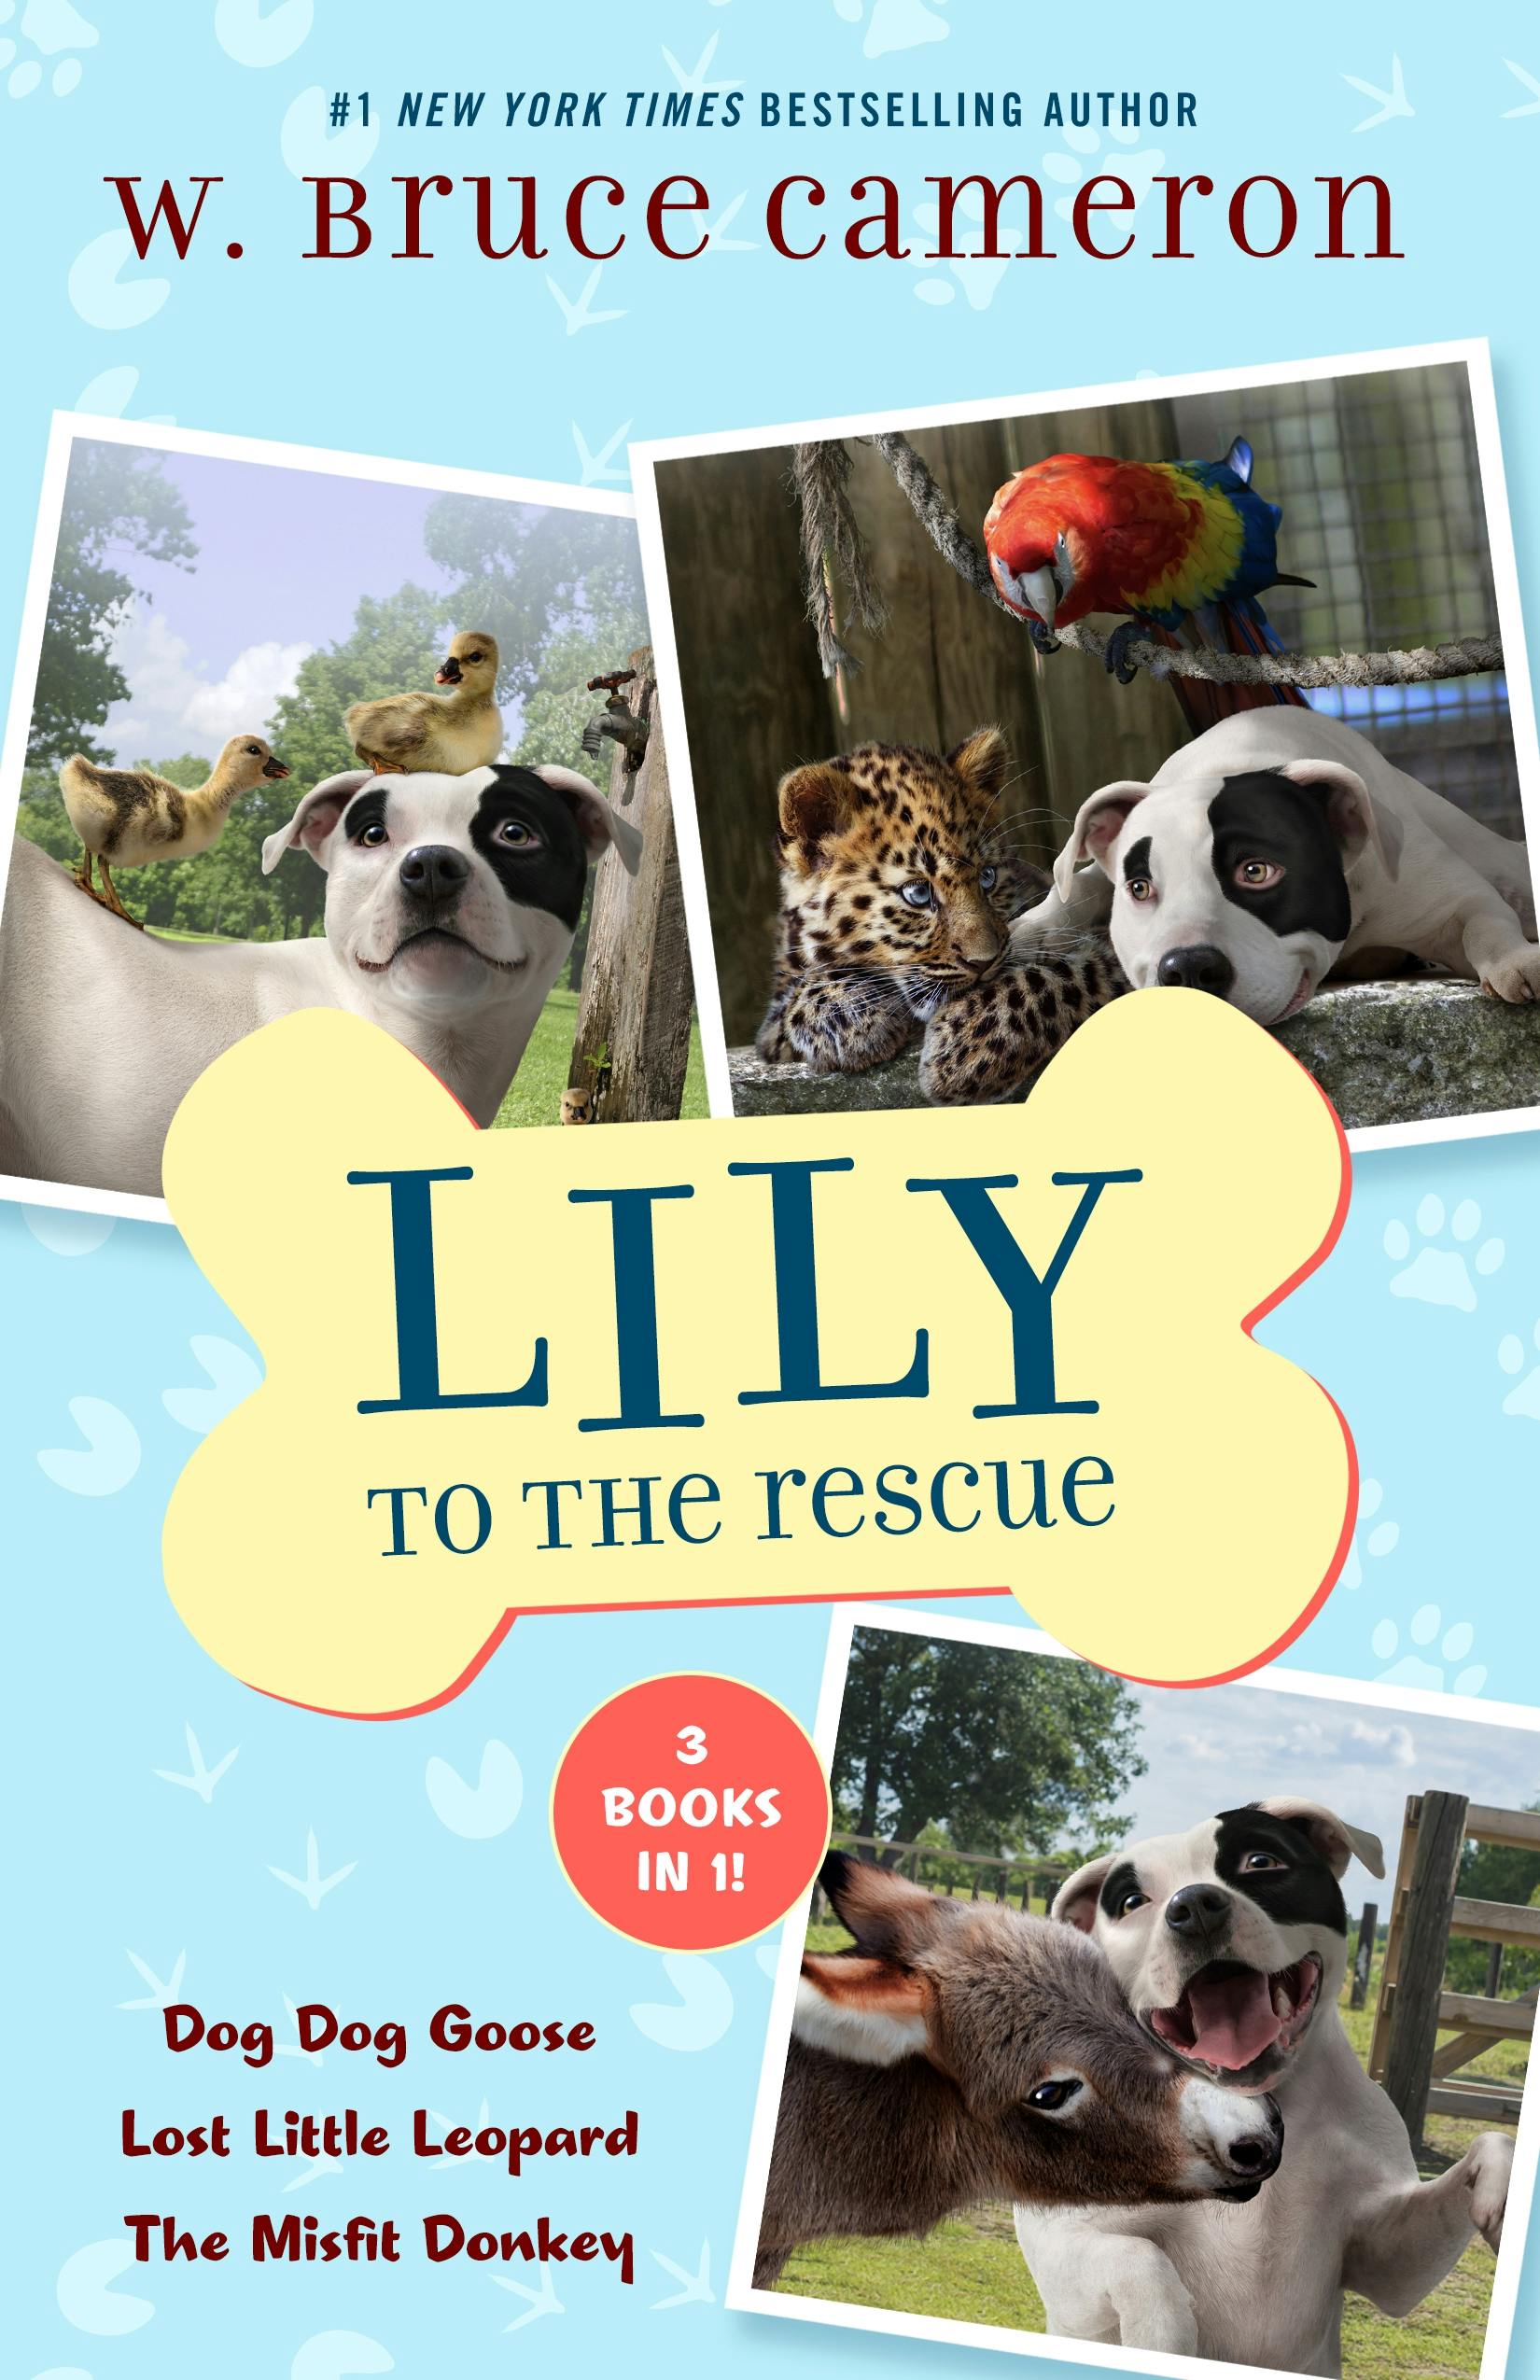 Cover for the book titled as: Lily to the Rescue Bind-Up Books 4-6